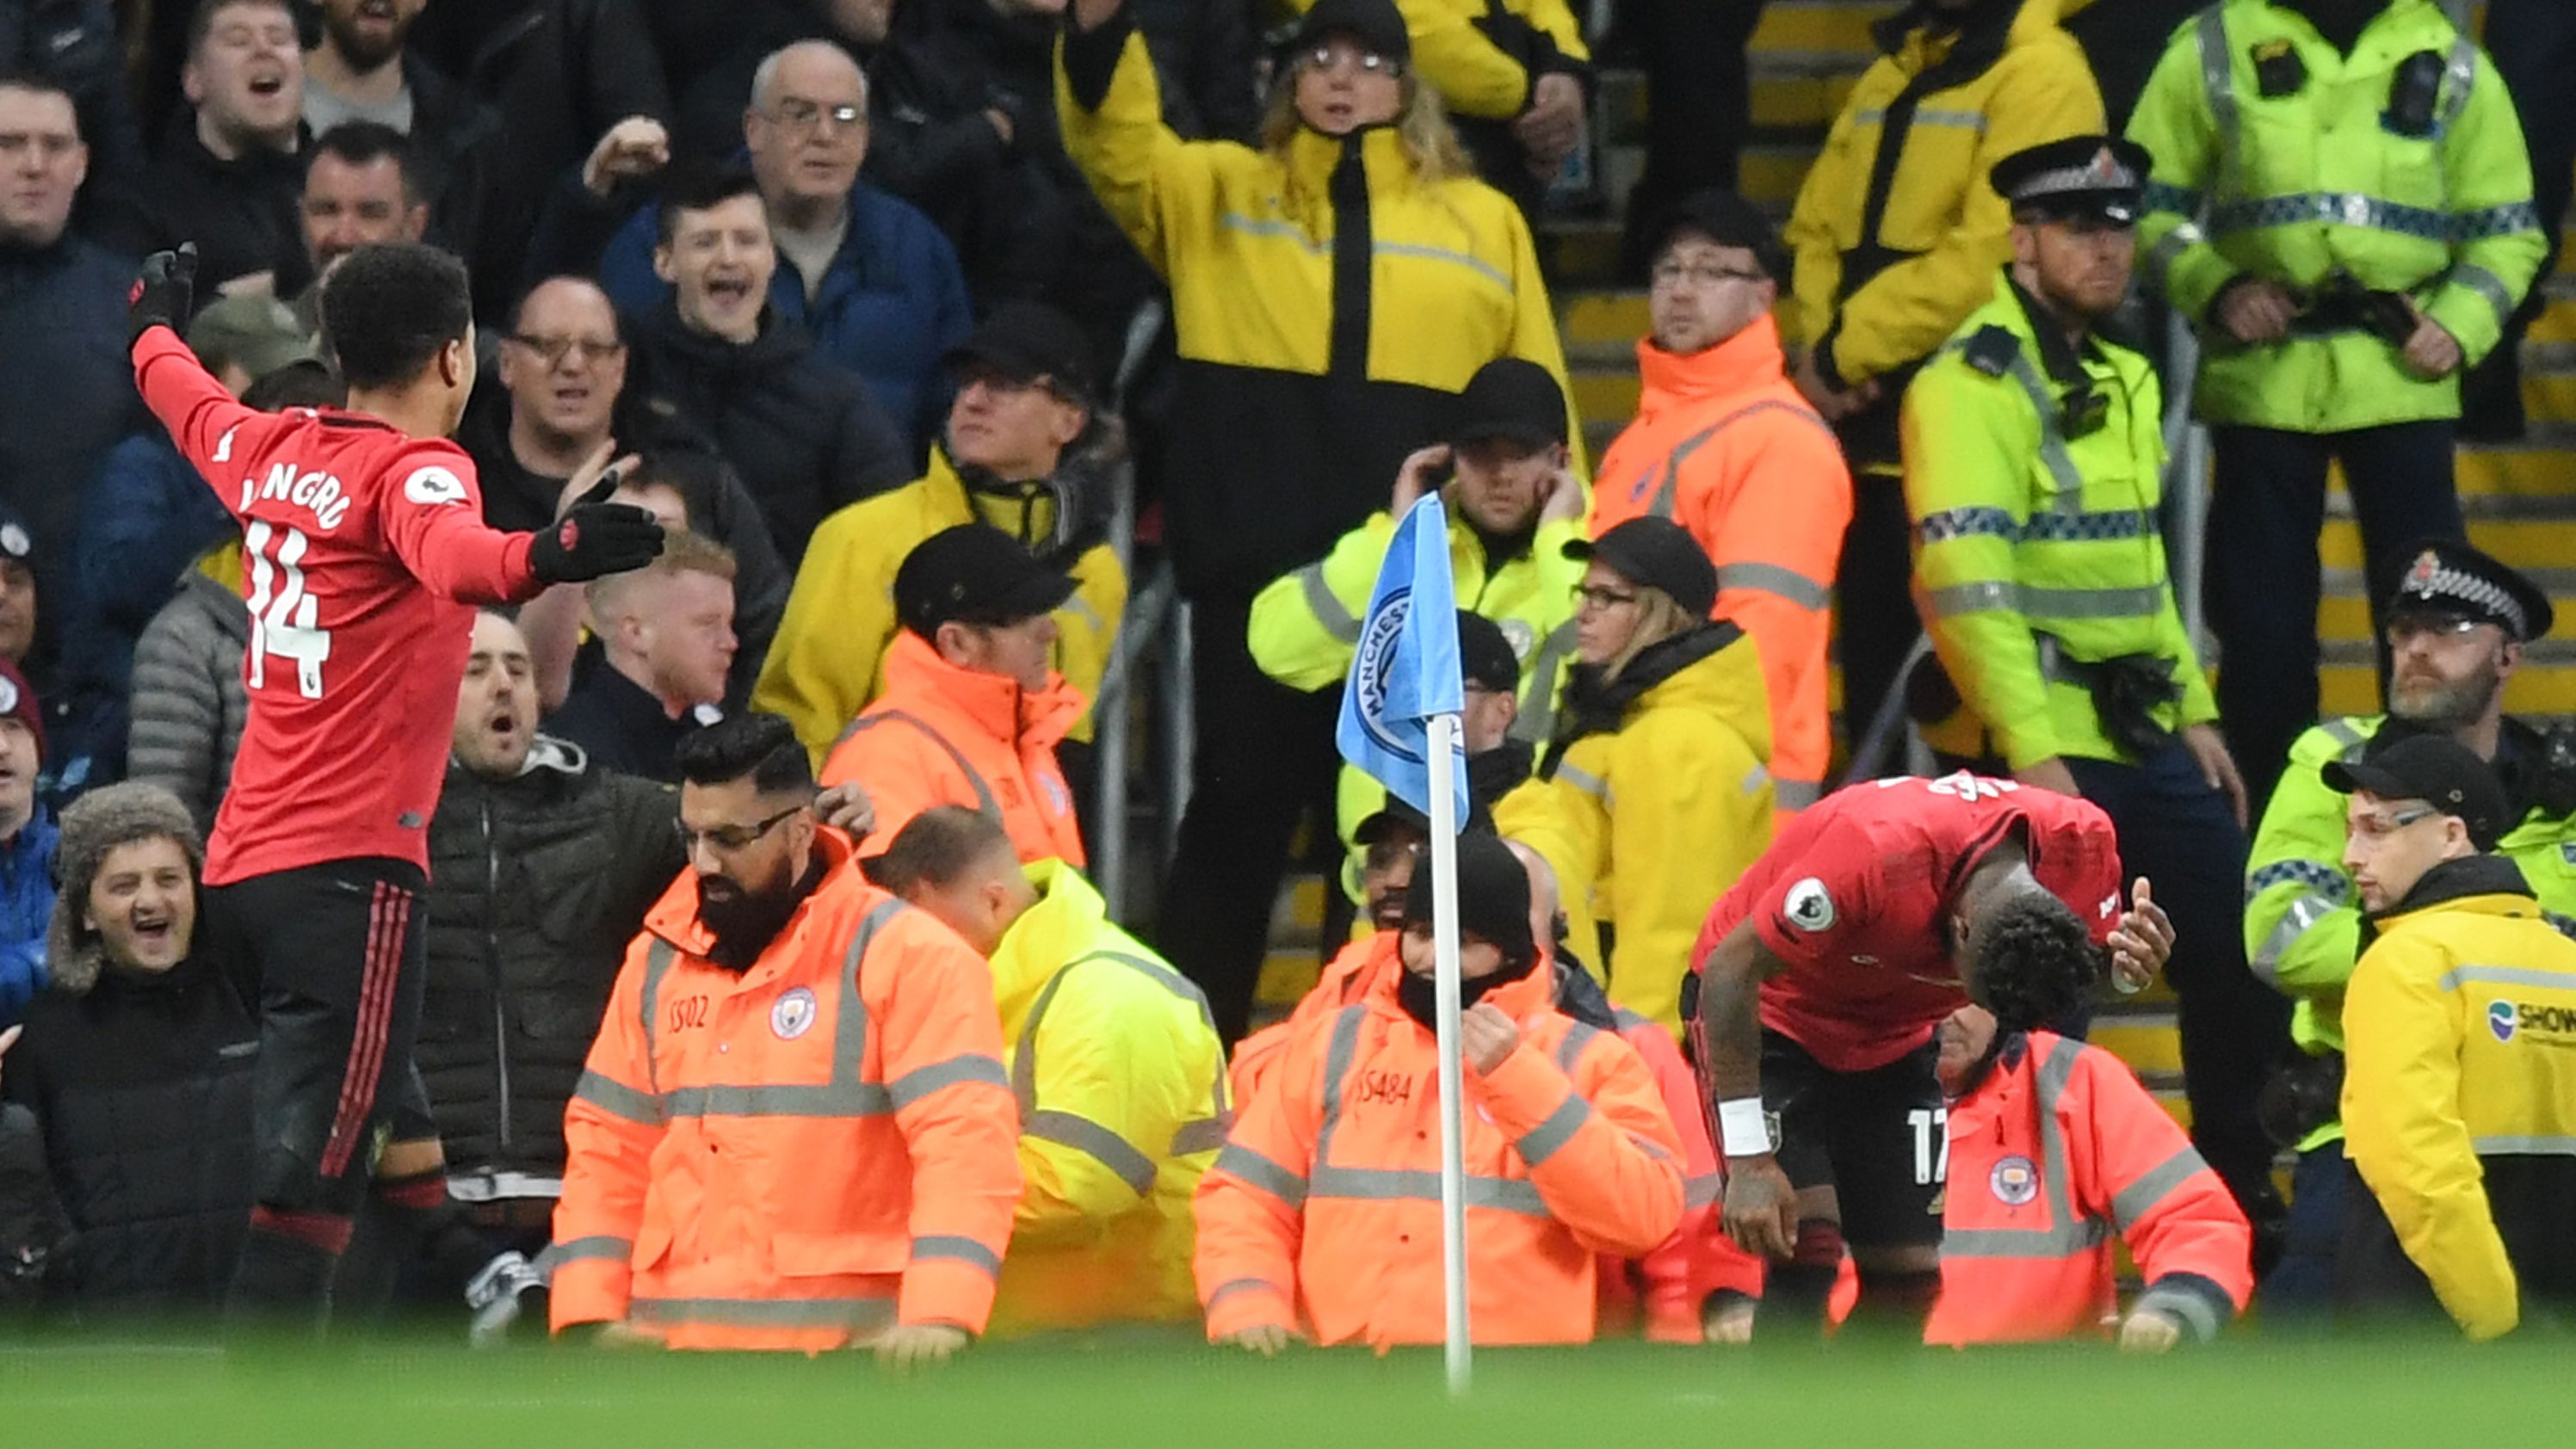 Fred of Manchester United reacts after being struck by an item thrown by Manchester City fans.